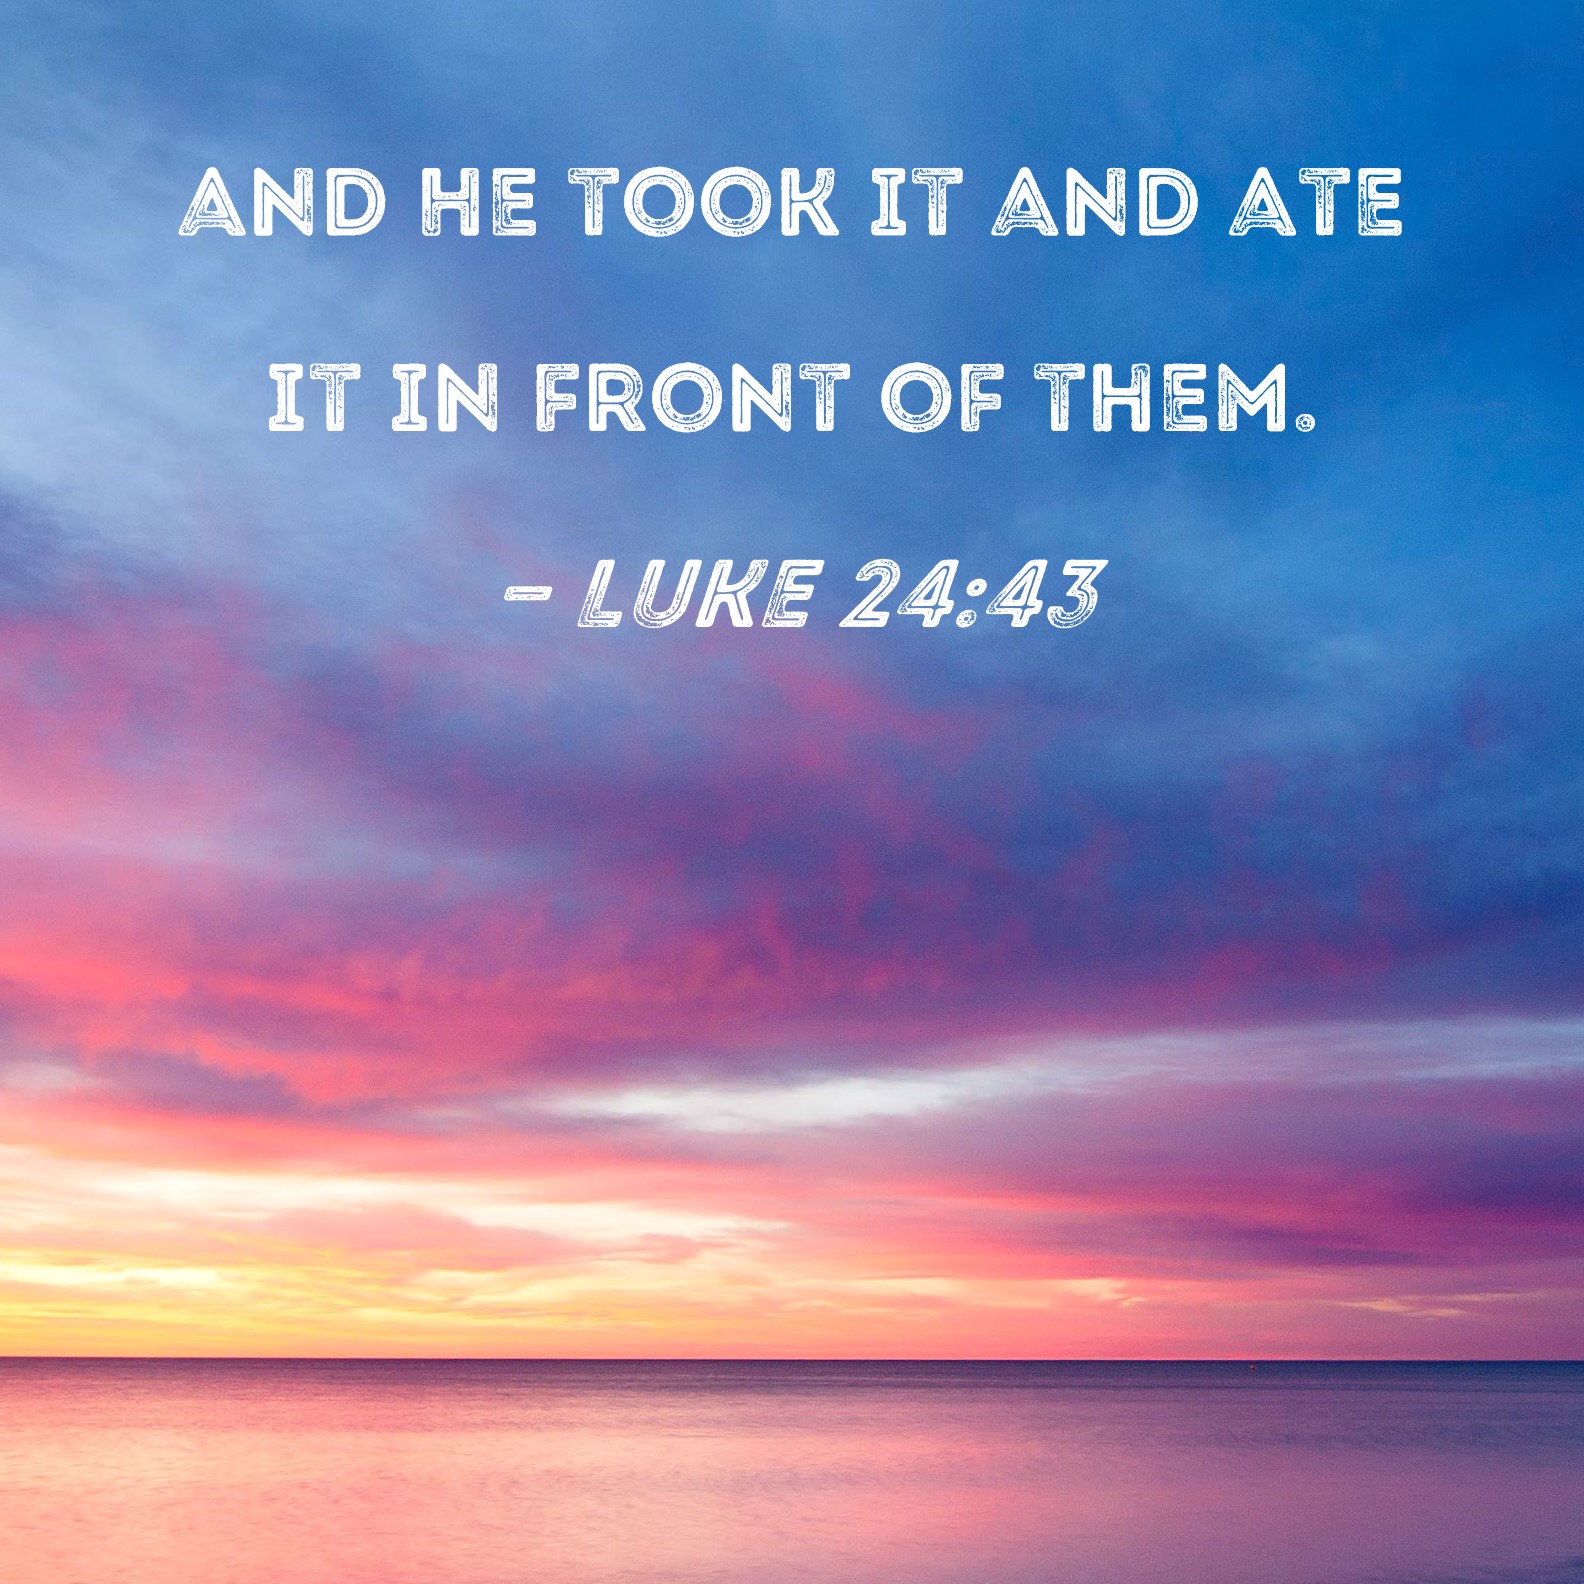 Luke 24:43 and He took it and ate it in front of them.